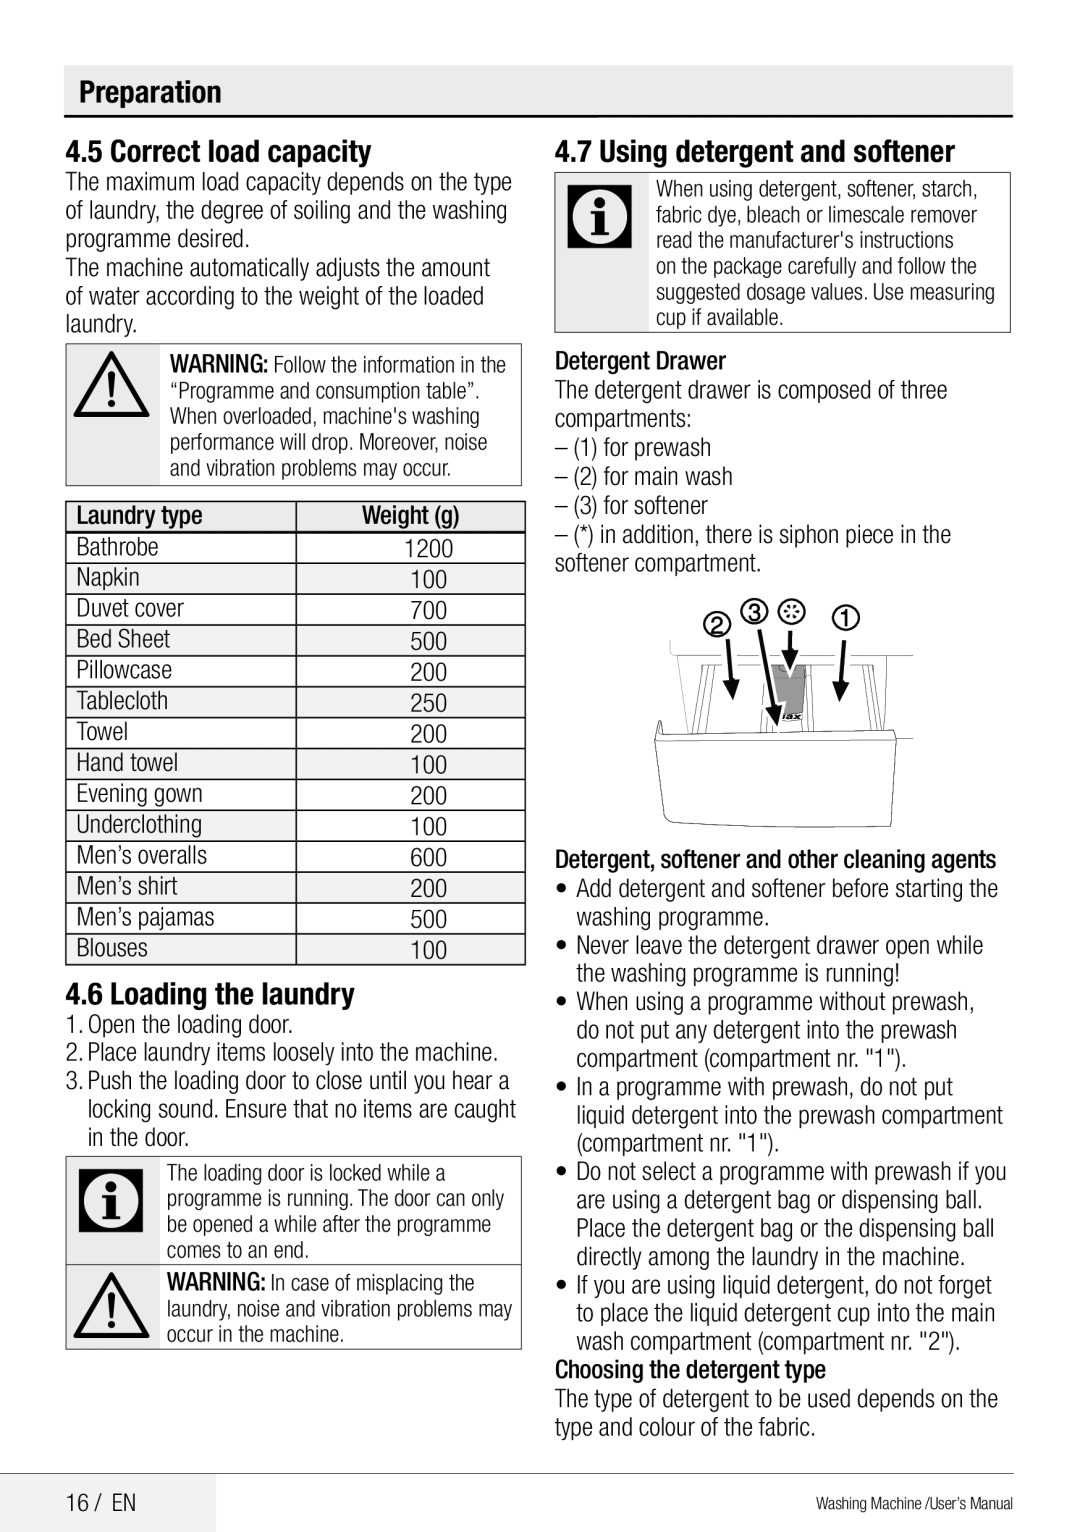 Blomberg WNF 8441 AE20 user manual Preparation 4.5 Correct load capacity, Loading the laundry, Using detergent and softener 